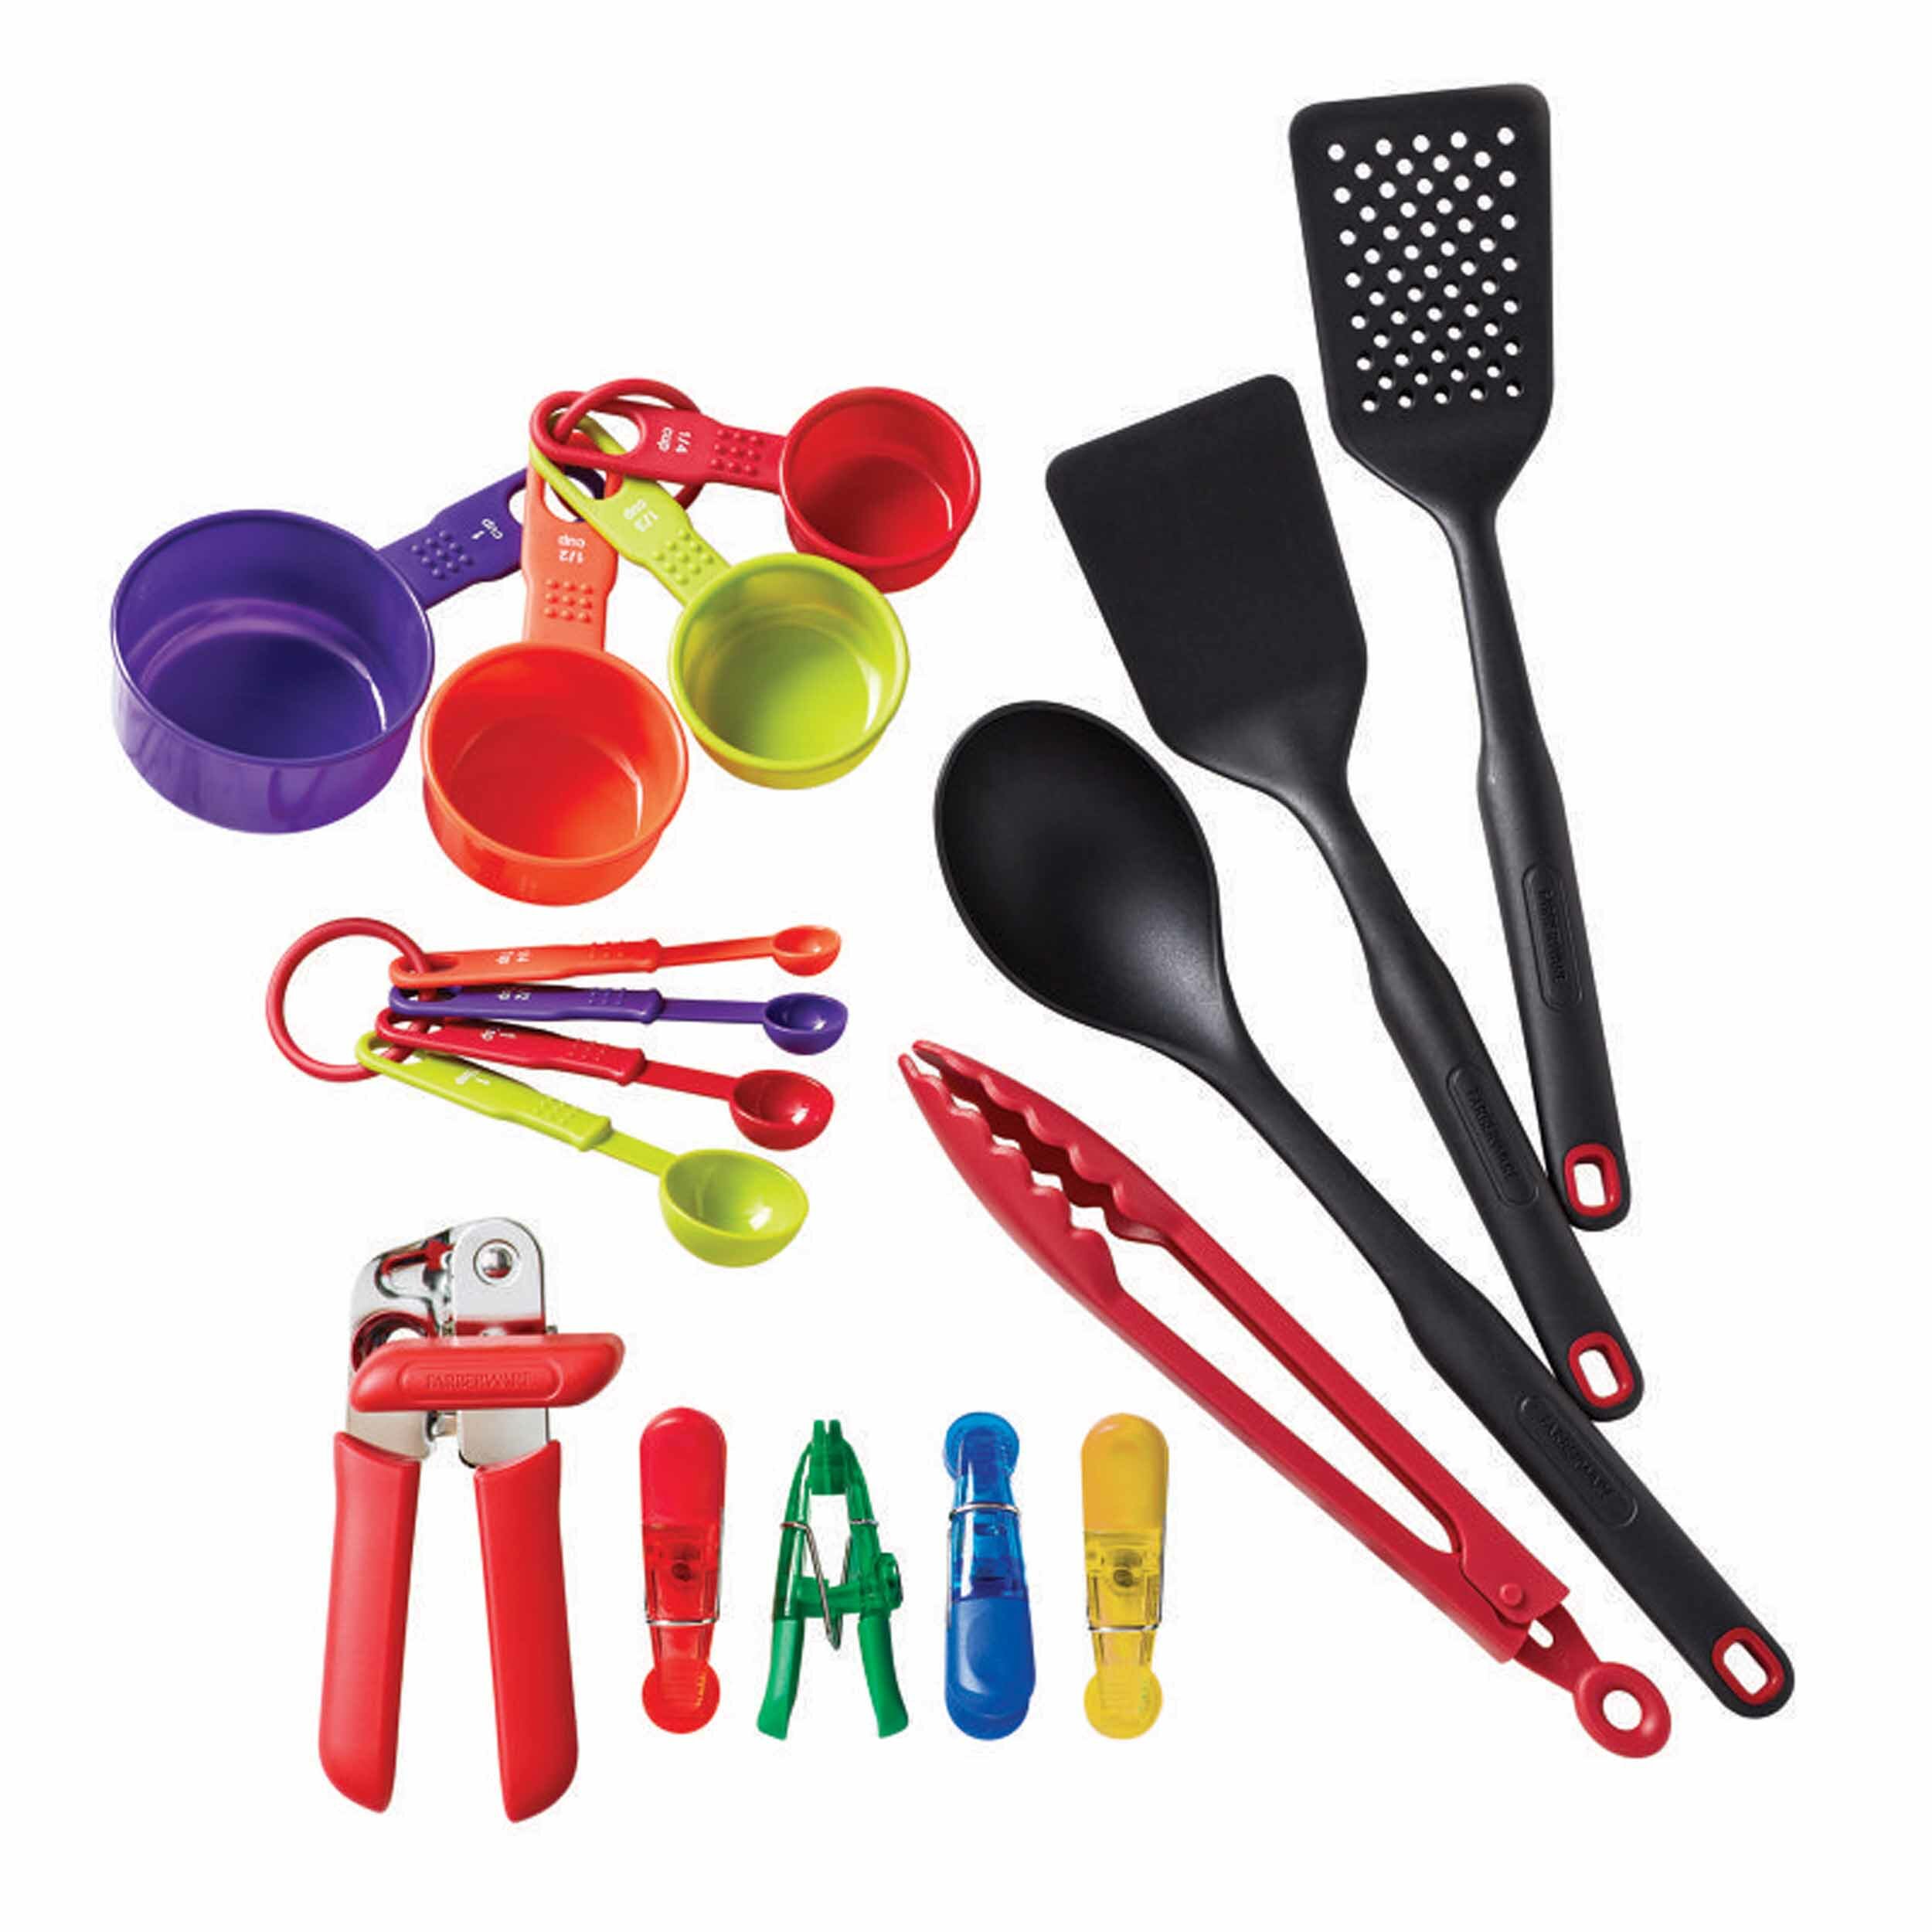 MegaChef Mulit-Color Silicone Cooking Utensils (Set of 12)